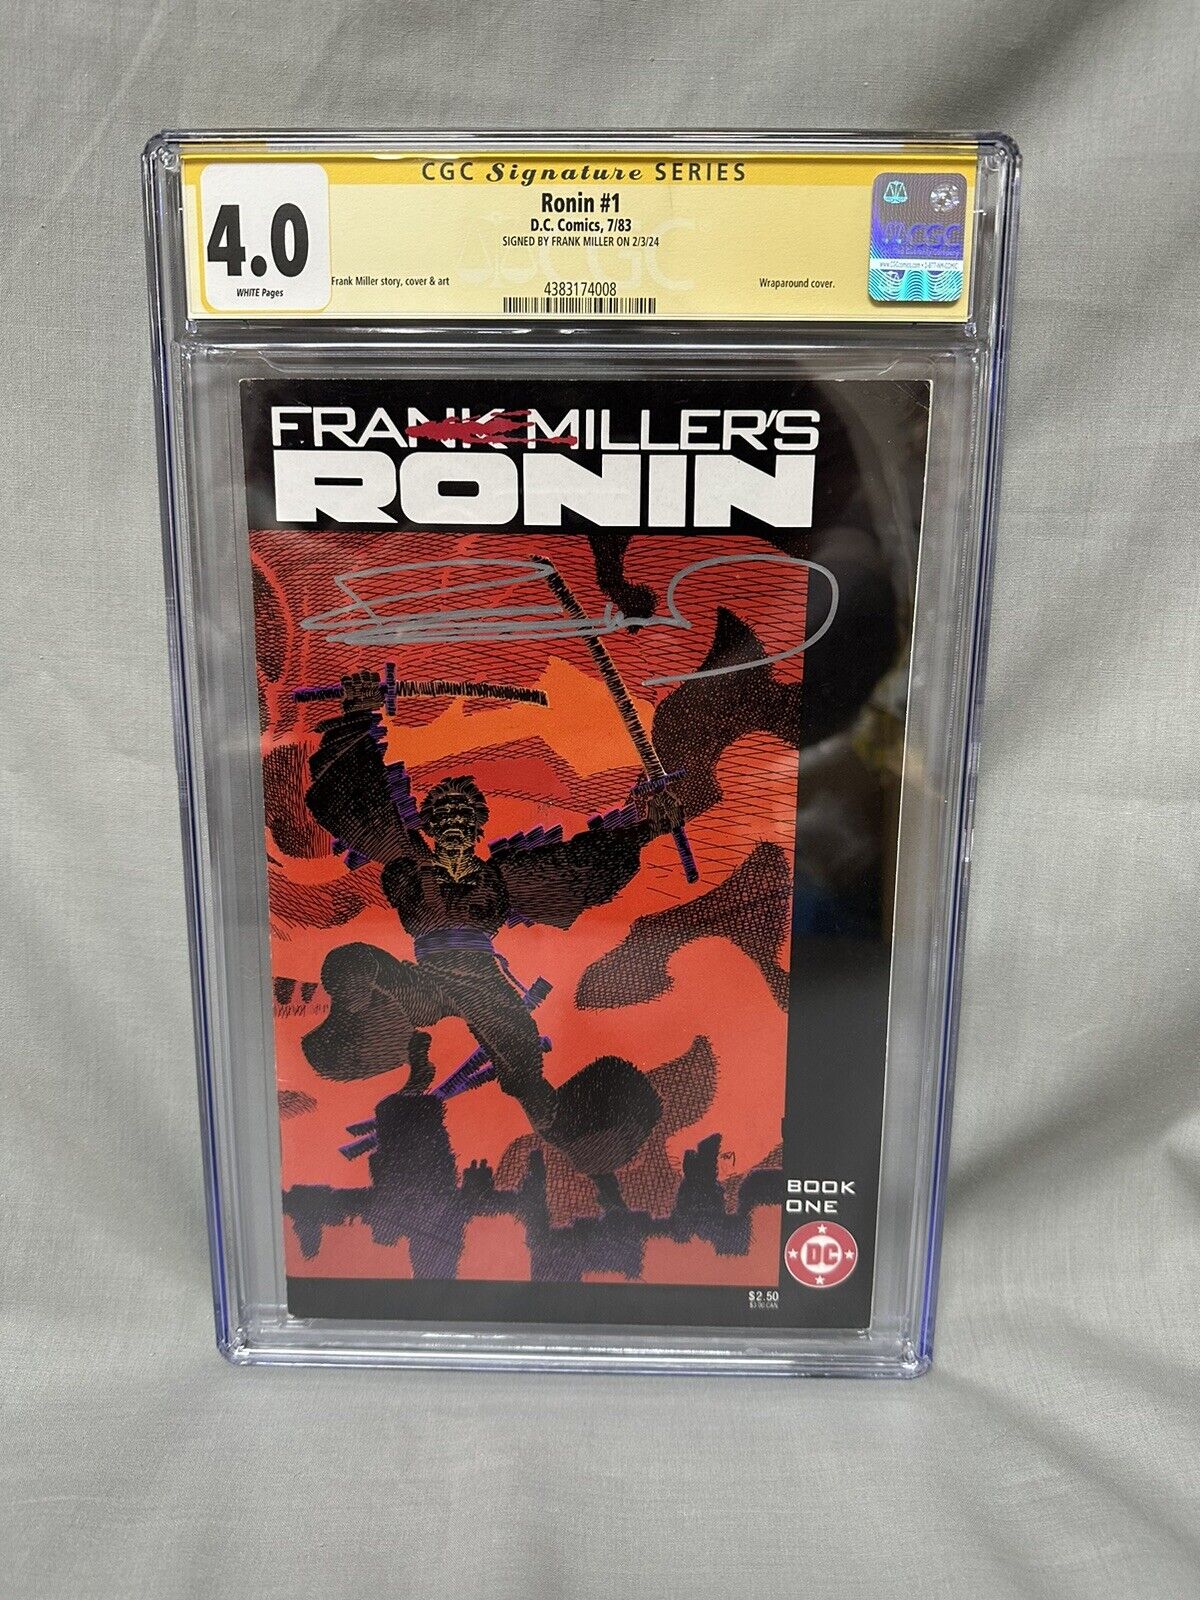 Frank Miller's Ronin #1 - CGC 4.0 signed Frank Miller (white pages)